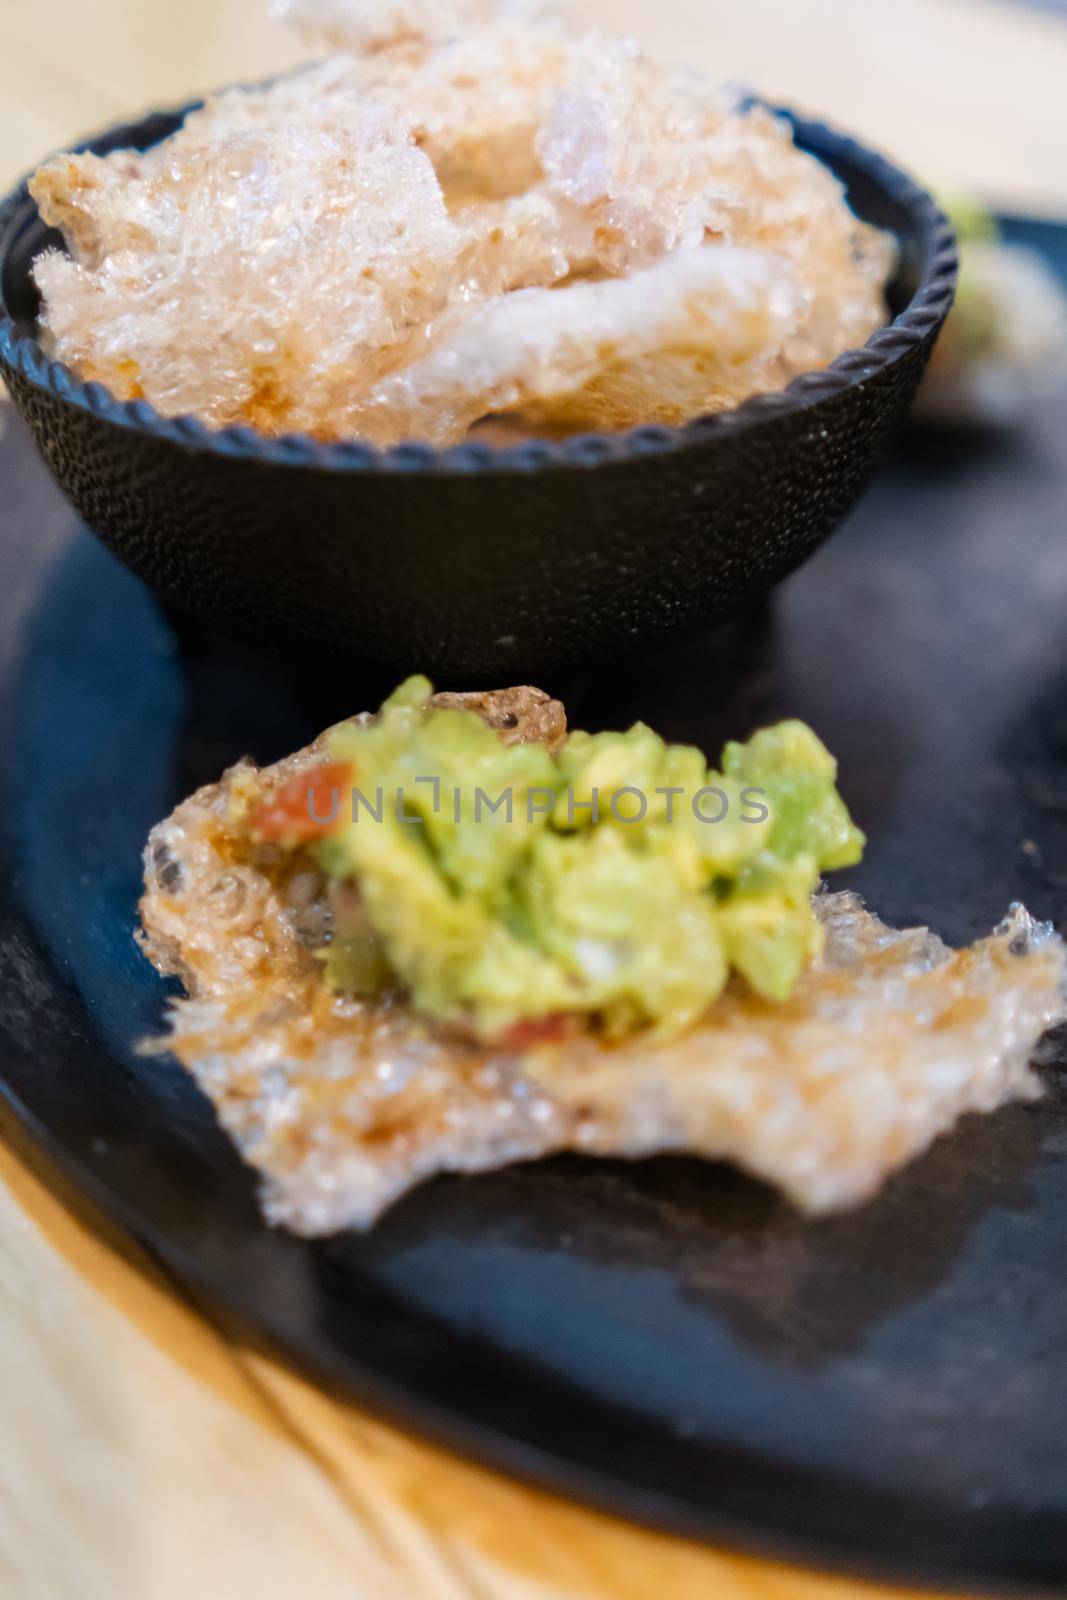 Pork rind with guacamole and bowl of pork rinds on traditional Mexican comal by Kanelbulle